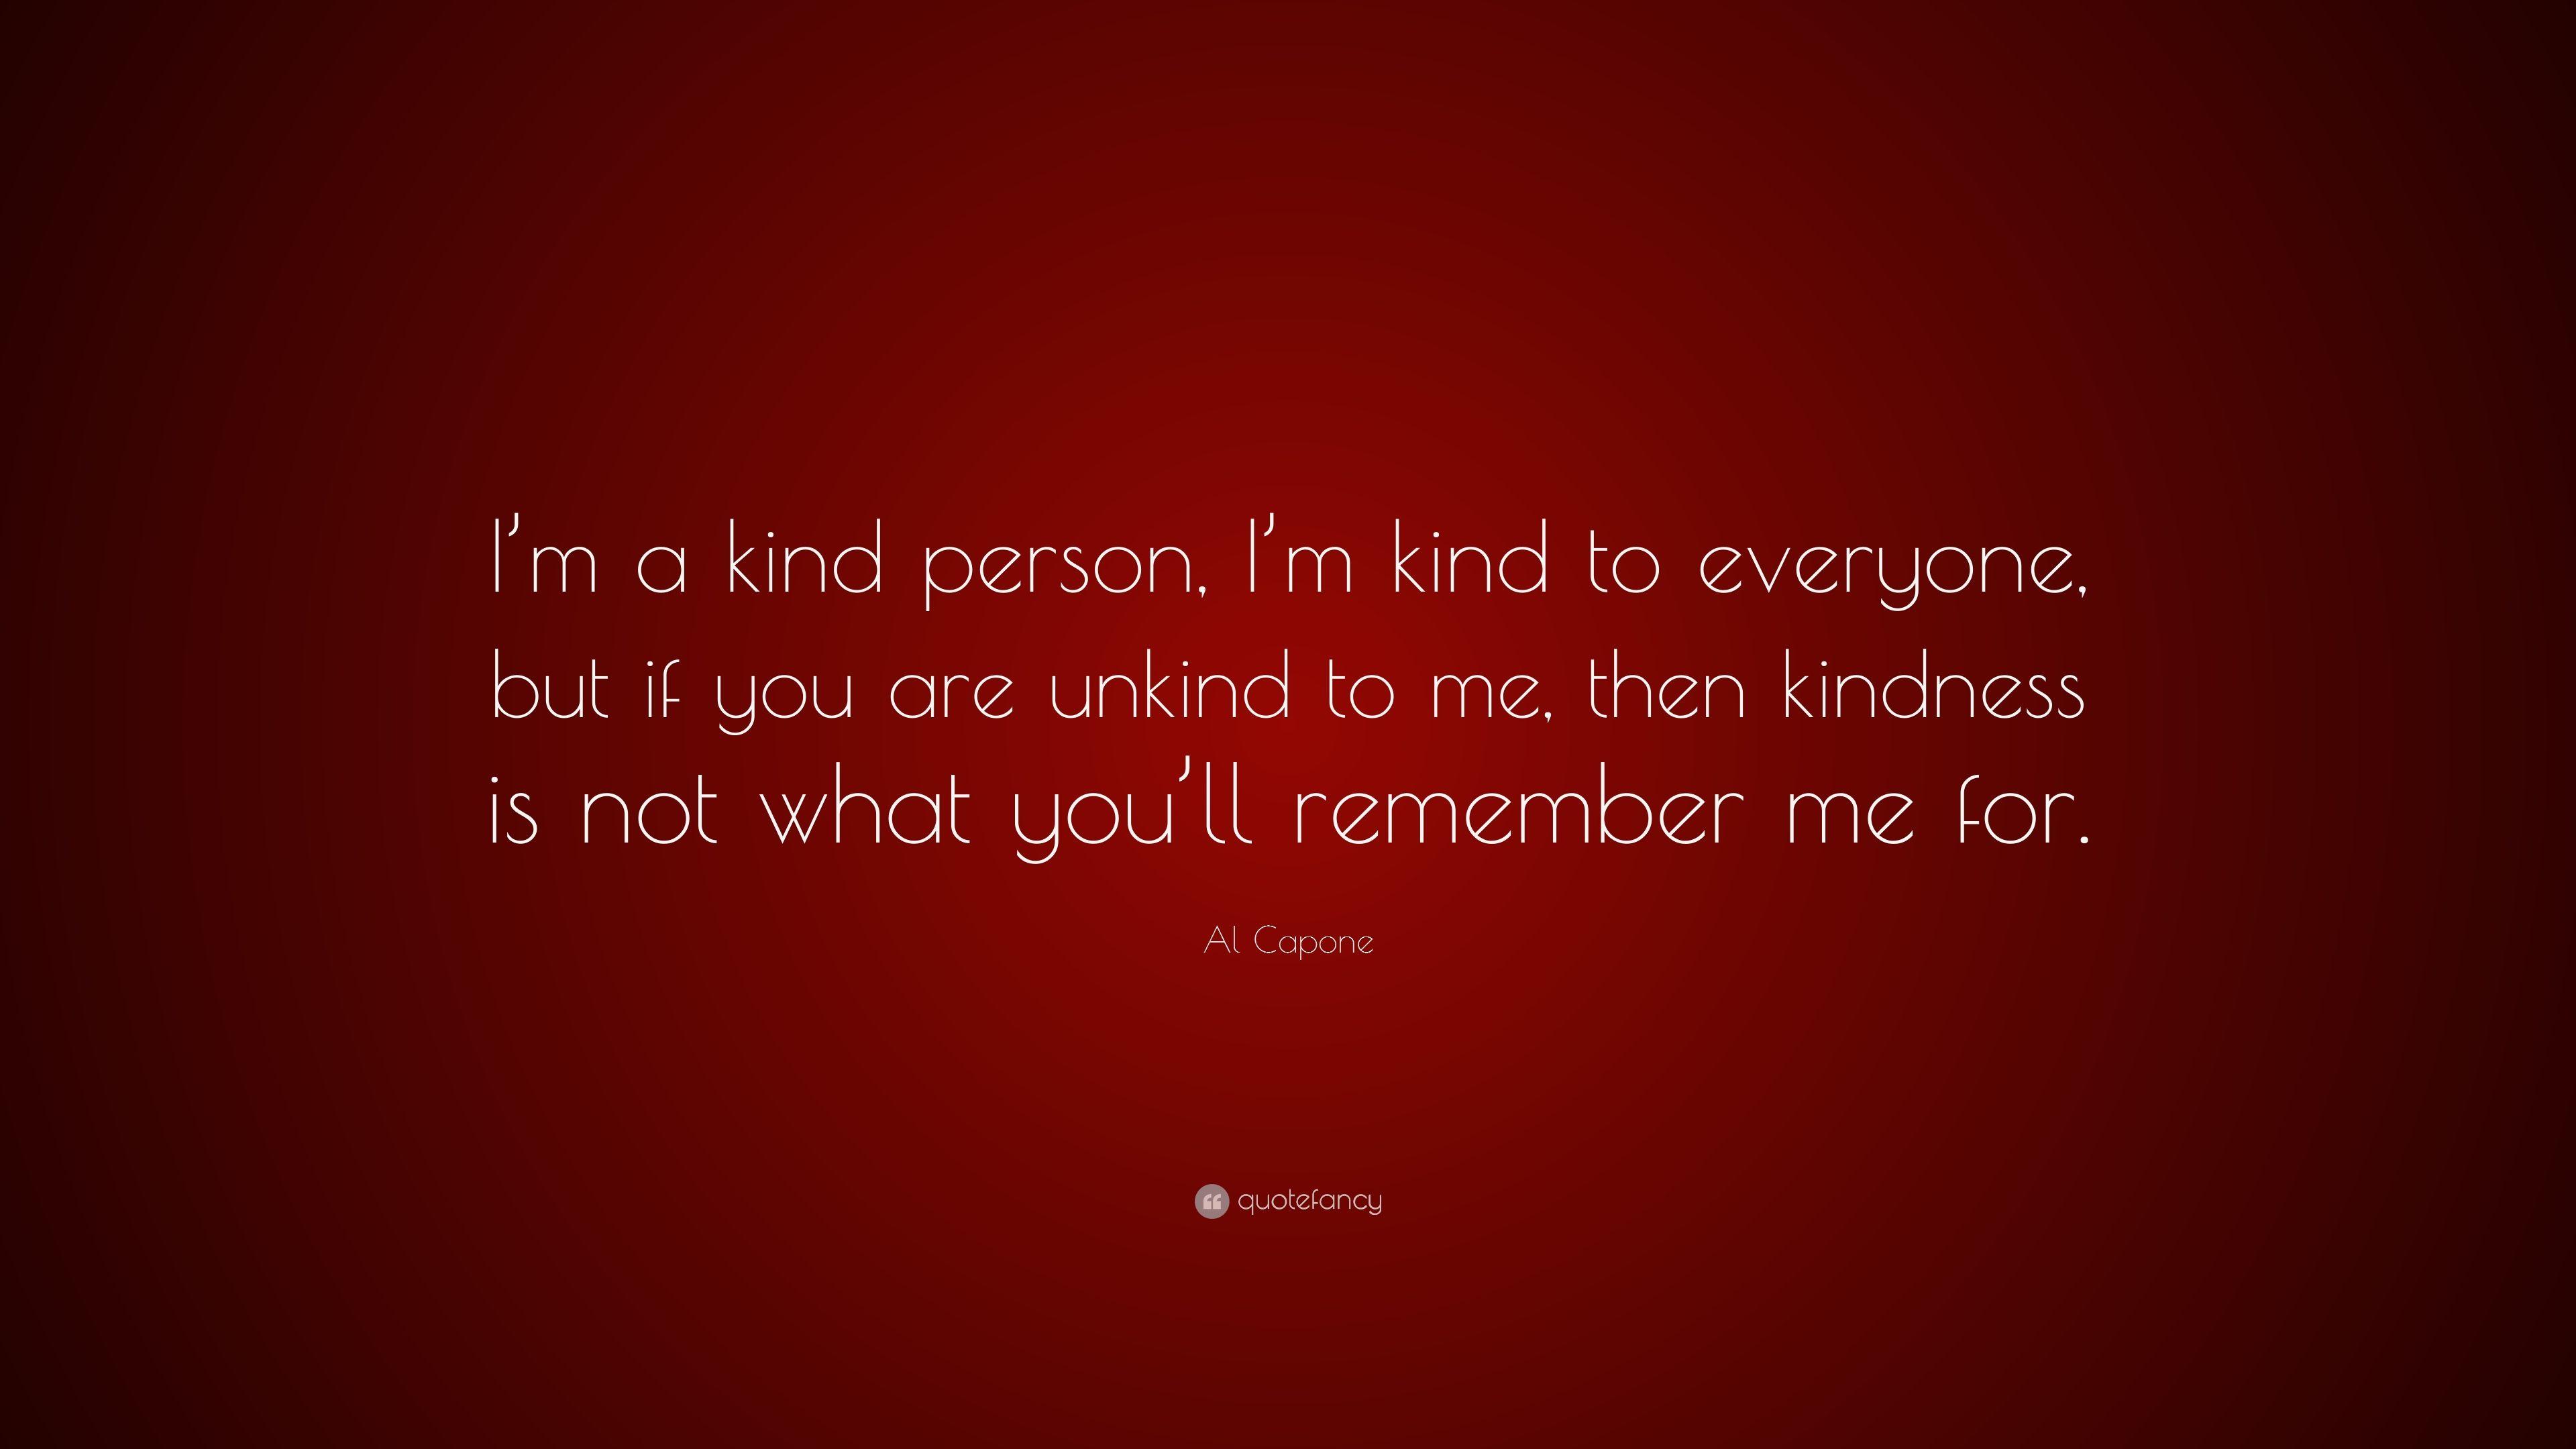 Al Capone Quote: “I'm a kind person, I'm kind to everyone, but if